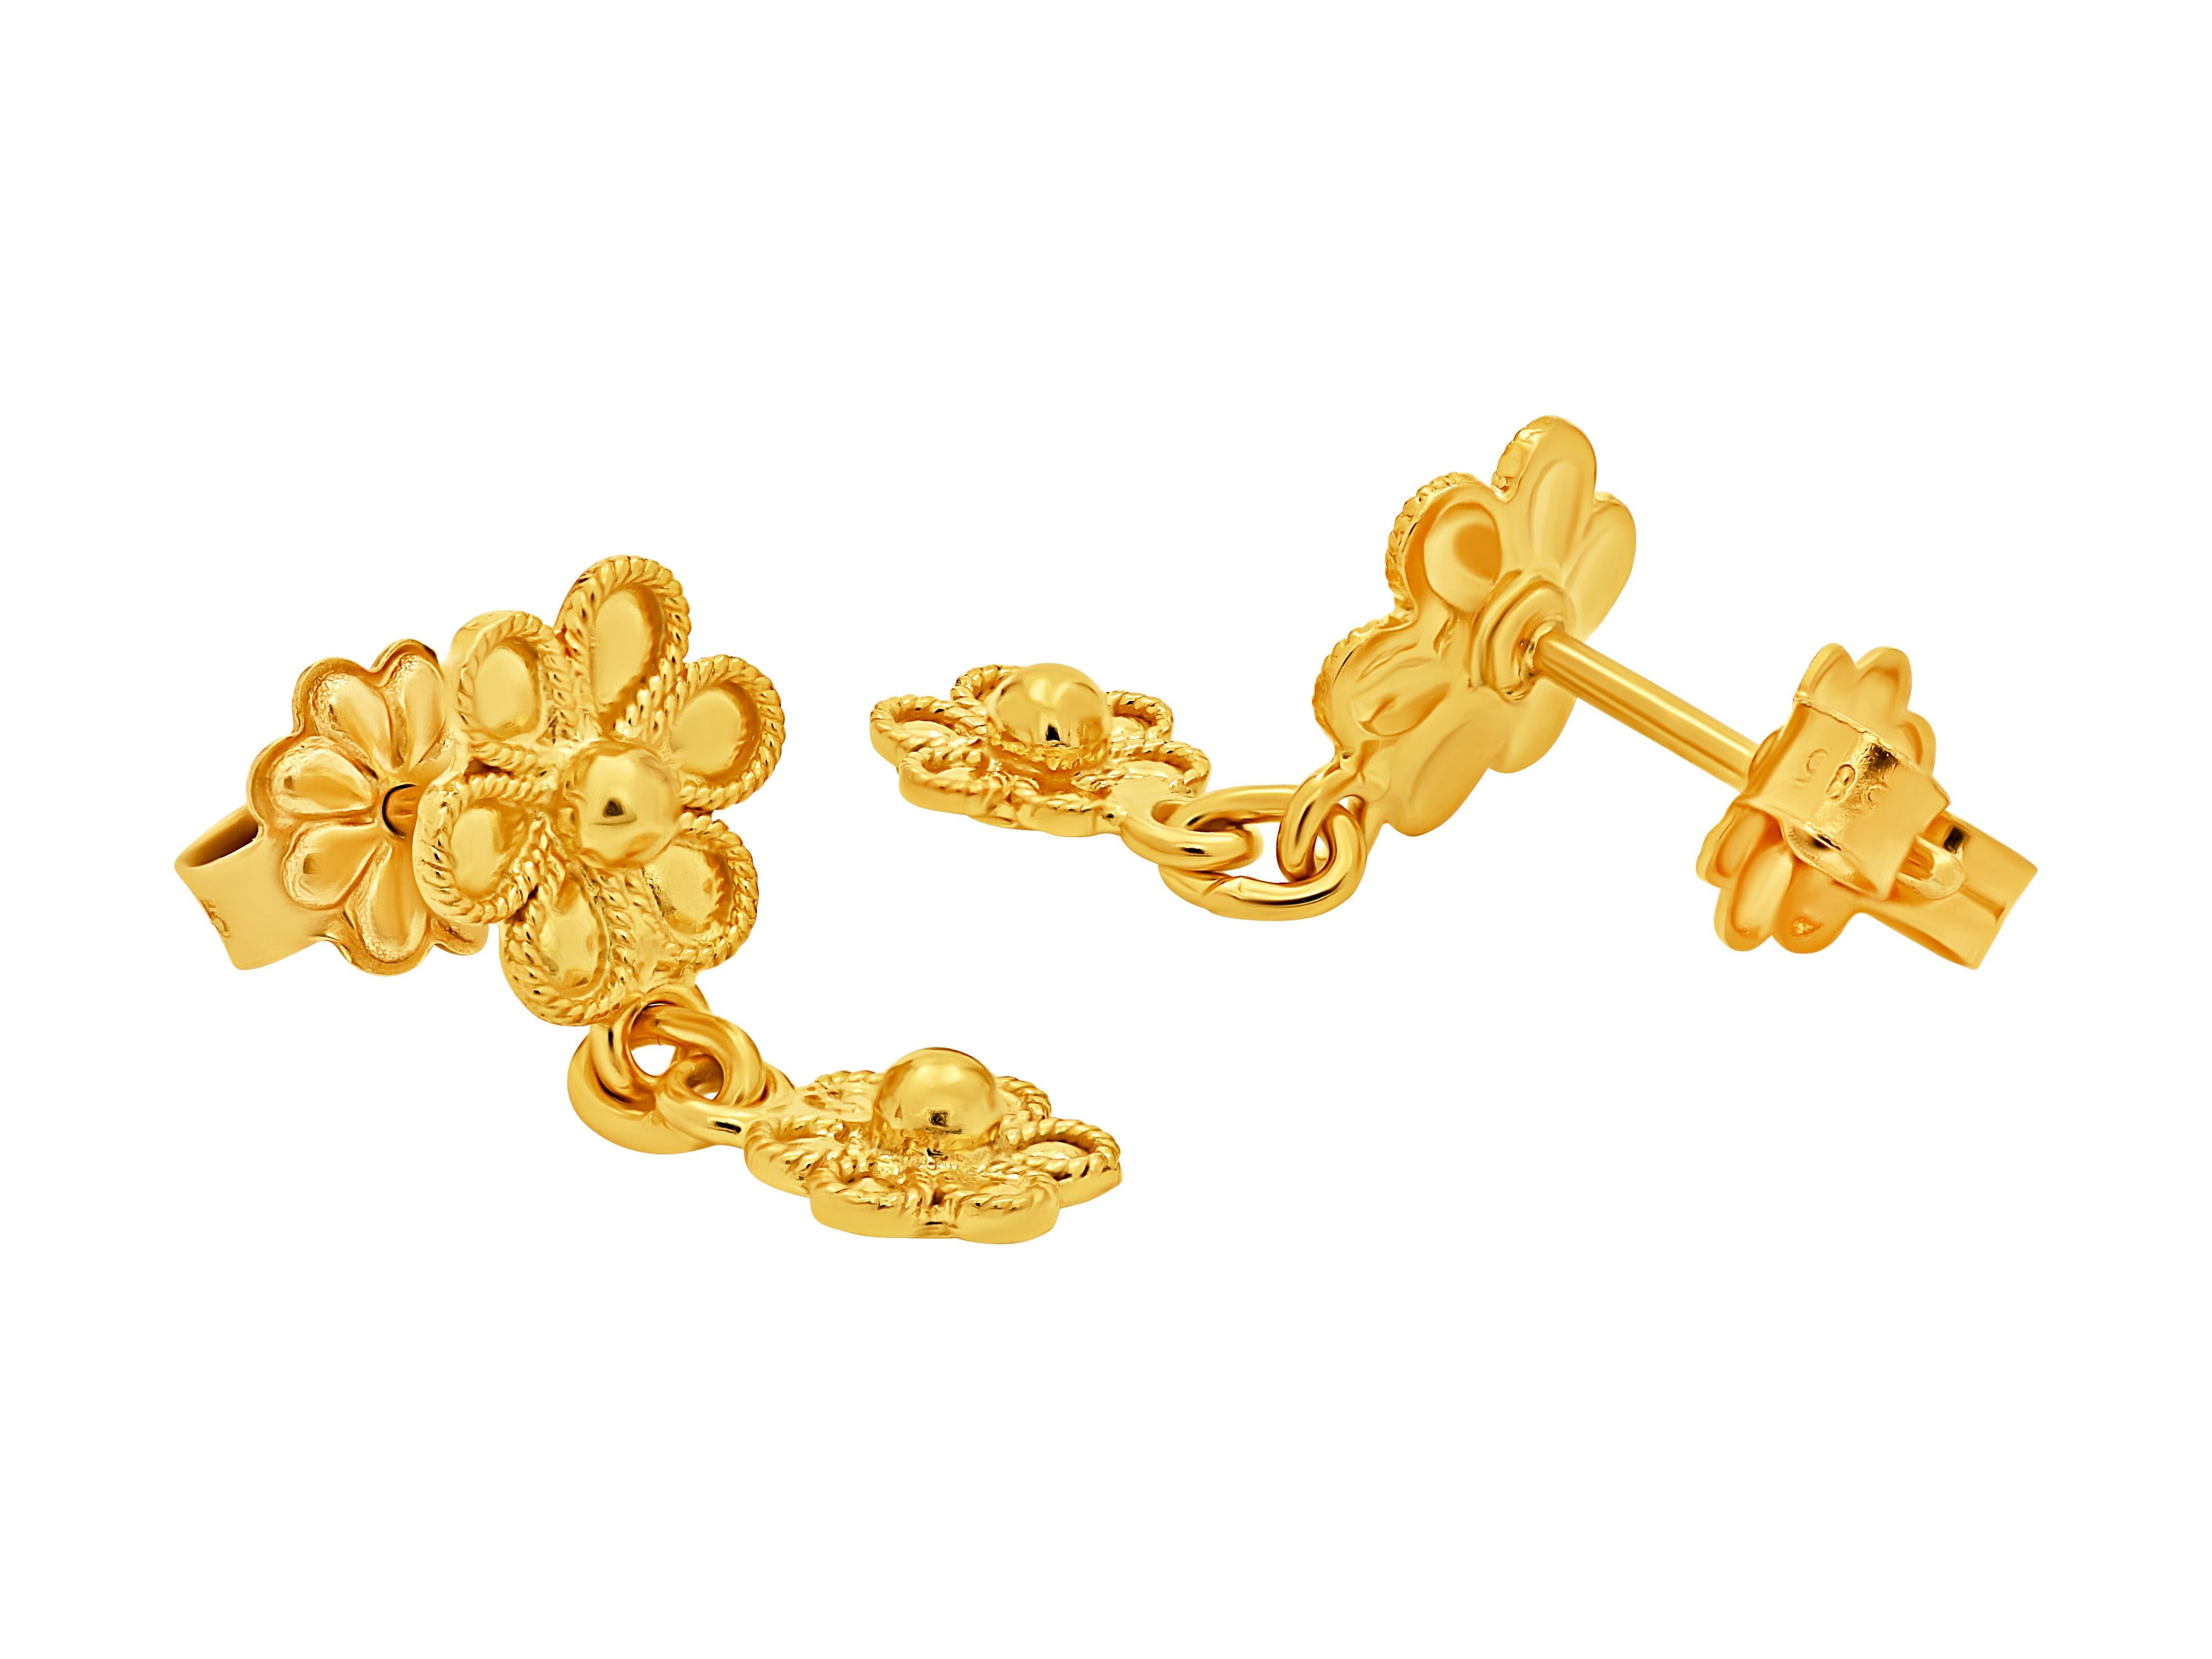 Dangle rosettes earrings with fligrees in 18k yellow gold. A neoclassical museum style work that shows class taste and knowledge.